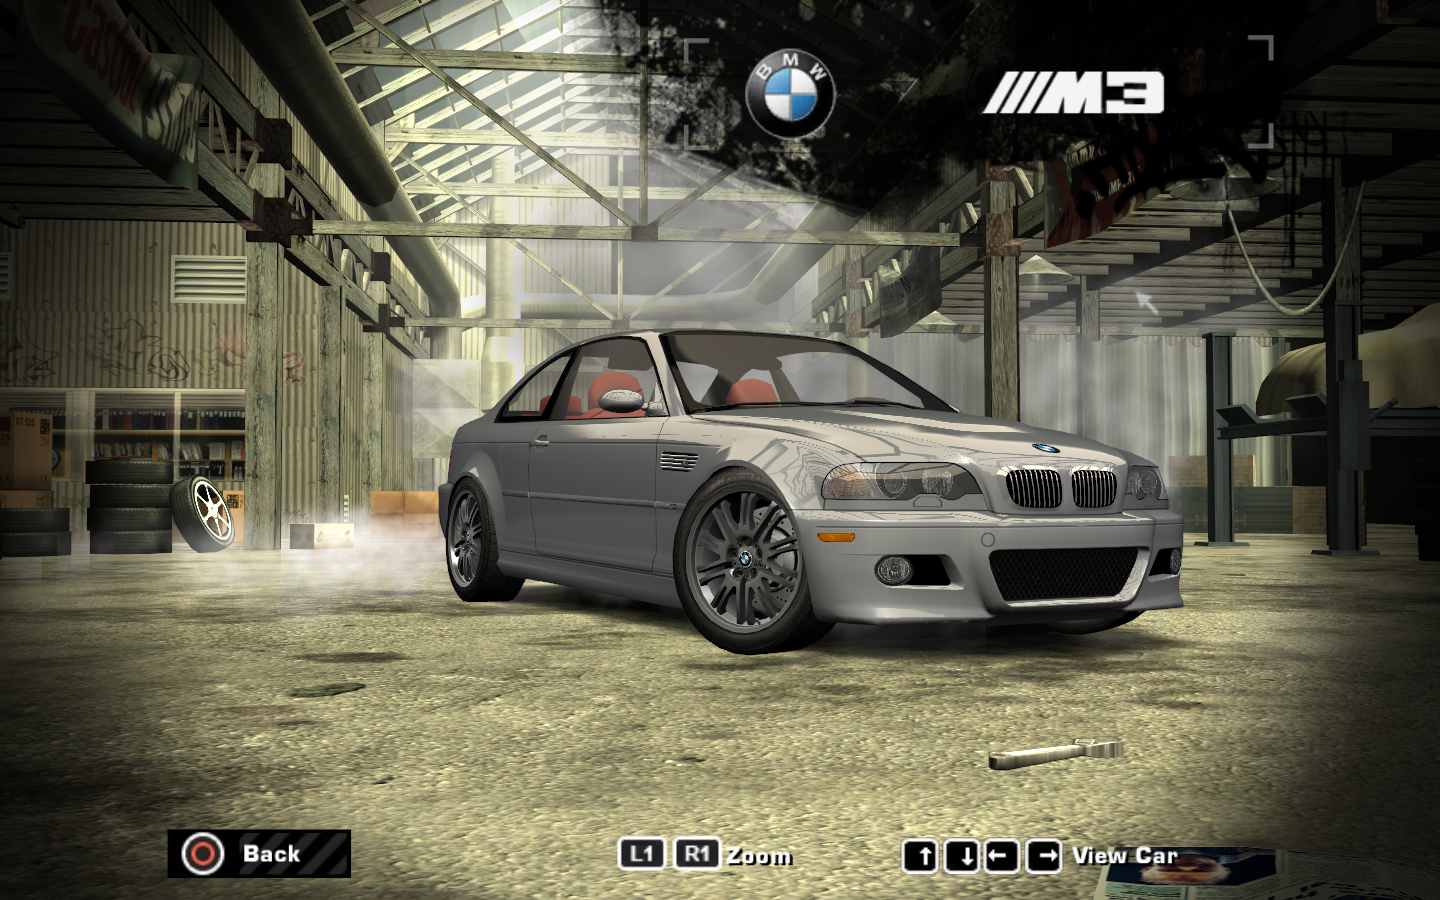 Need For Speed Most Wanted NFSMW: BMW M3 E46 Model Fix